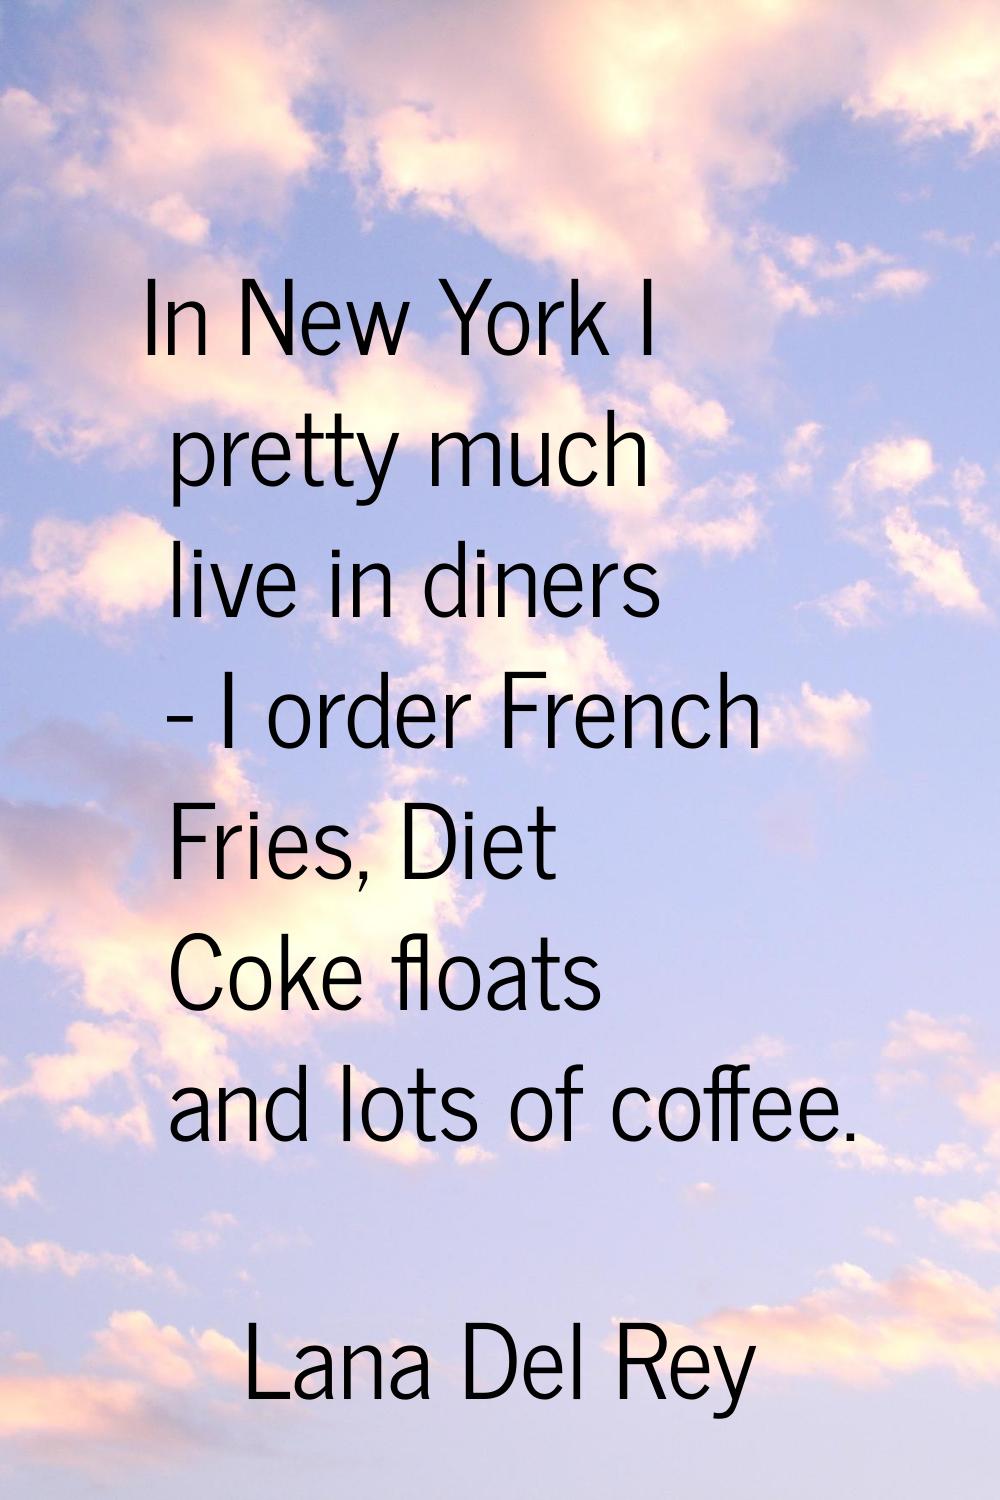 In New York I pretty much live in diners - I order French Fries, Diet Coke floats and lots of coffe